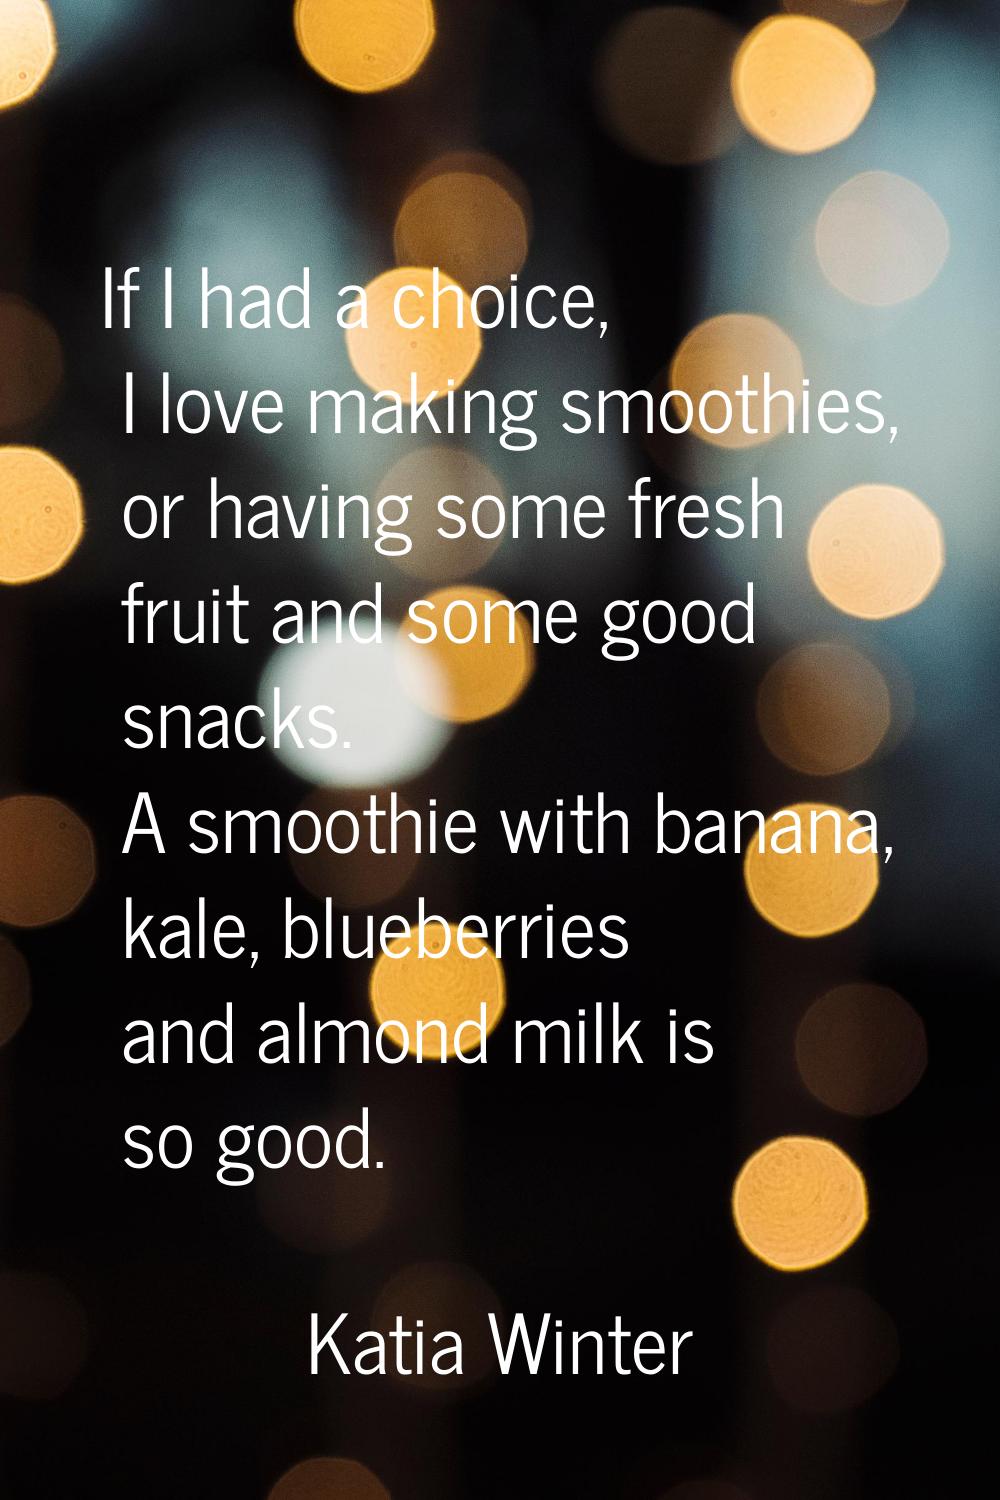 If I had a choice, I love making smoothies, or having some fresh fruit and some good snacks. A smoo